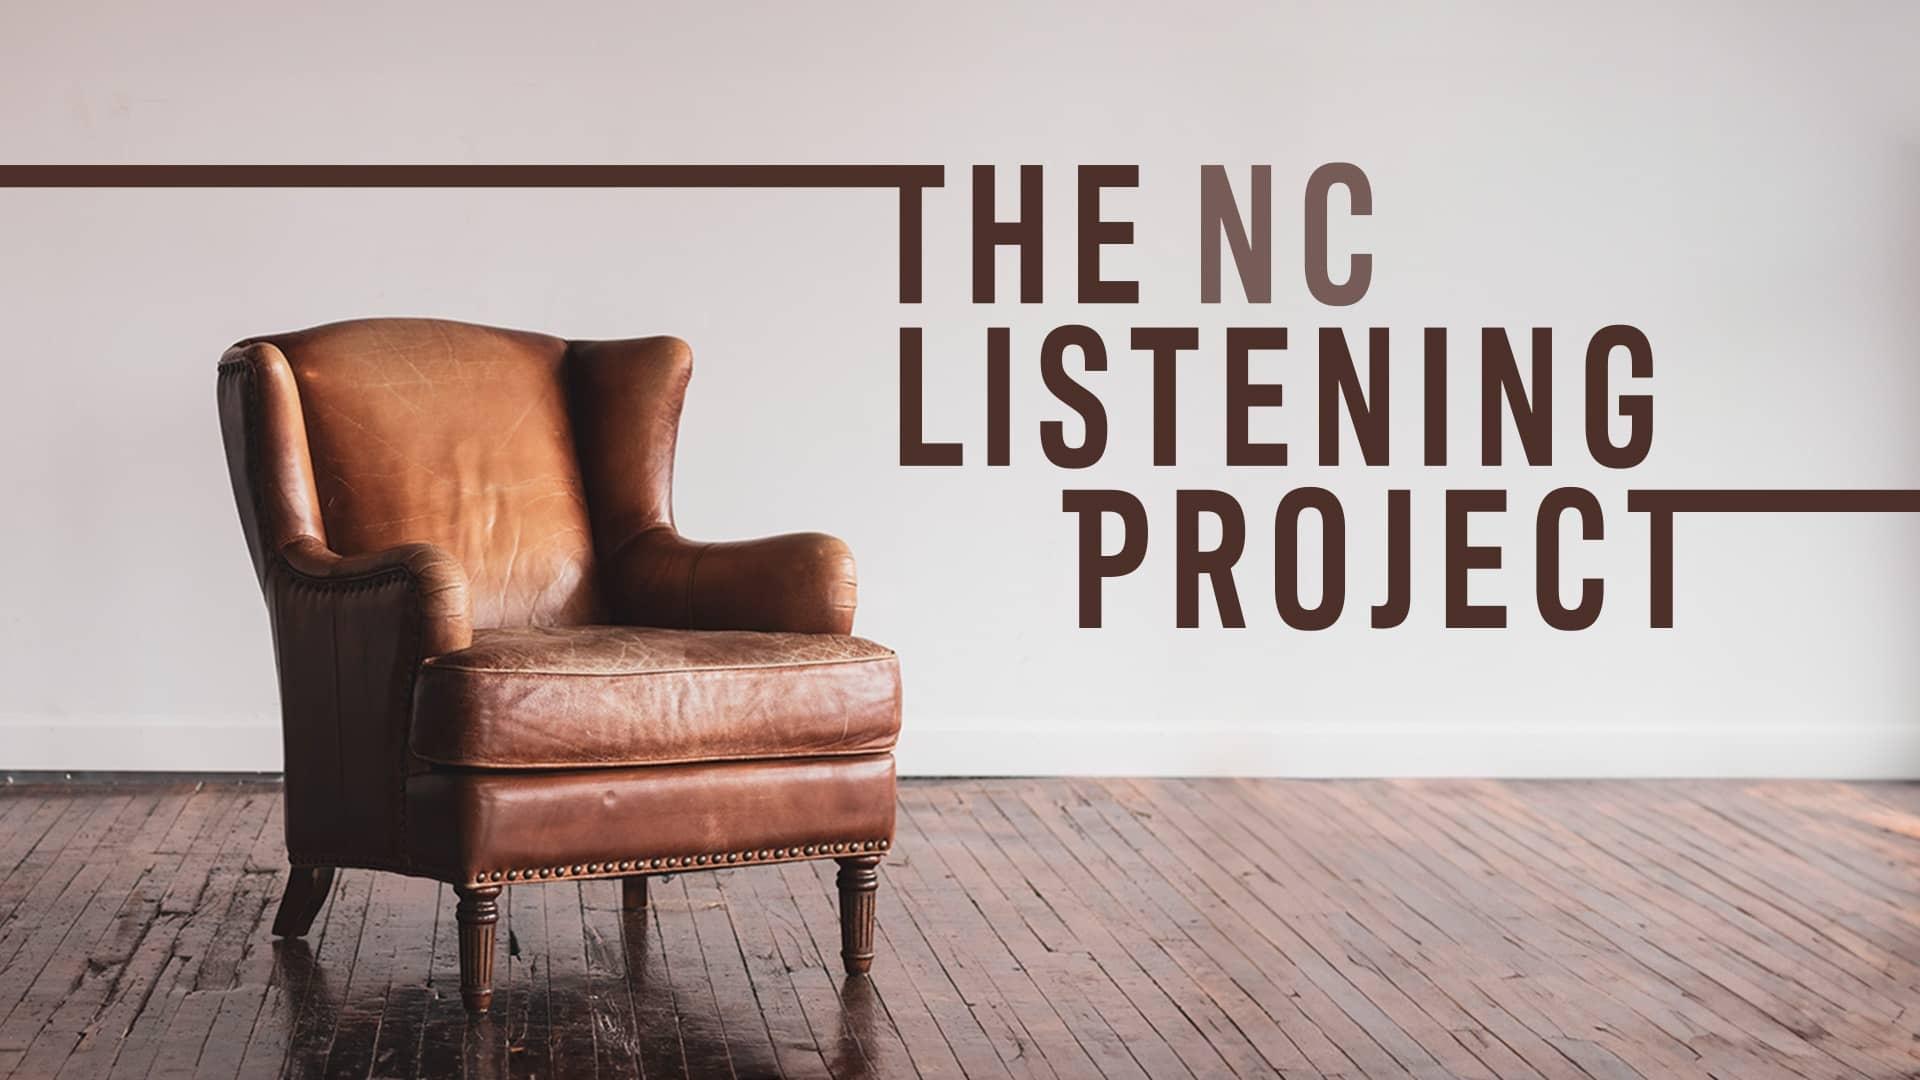 A dark brown worn leather chair in a room with wood floors and a pale gray wall, with the logo "The NC Listening Project."